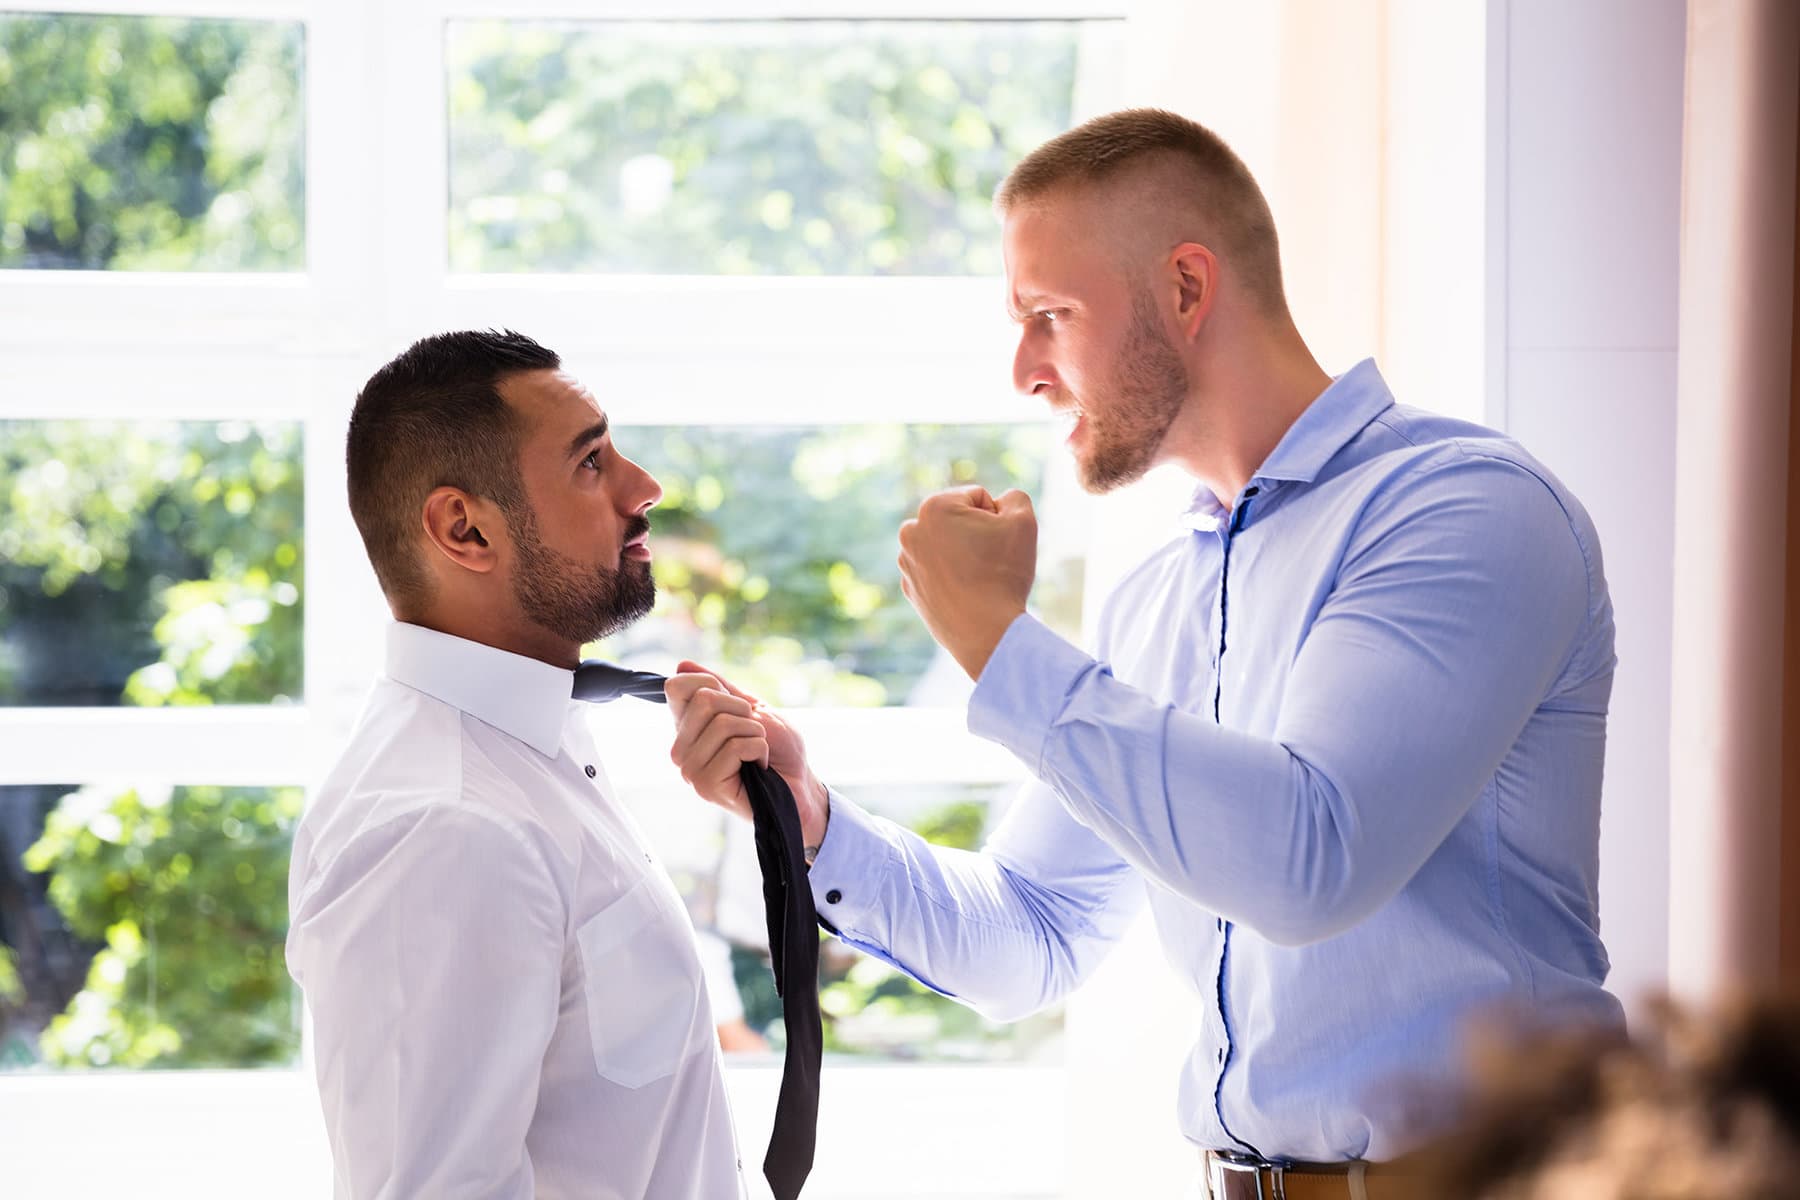 Image of Angry Young Businessman Fighting With His Coworker. Being a victim of battery or assault can be a traumatic experience, leaving you physically injured and emotionally scarred. Navigating the legal process to seek justice and compensation can be overwhelming and confusing. When you're dealing with the physical and emotional aftermath of an assault or battery, the last thing you need is the added stress of trying to understand complex legal procedures and fight for your rights alone. R & G Personal Injury Lawyers are here to support you. As experienced battery and assault injury lawyers, we specialize in helping victims like you get the justice and compensation they deserve. Our dedicated team will guide you through every step of the legal process, from gathering evidence to fighting for your rights in court. With R & G Personal Injury Lawyers by your side, you can focus on healing while we fight for your justice!